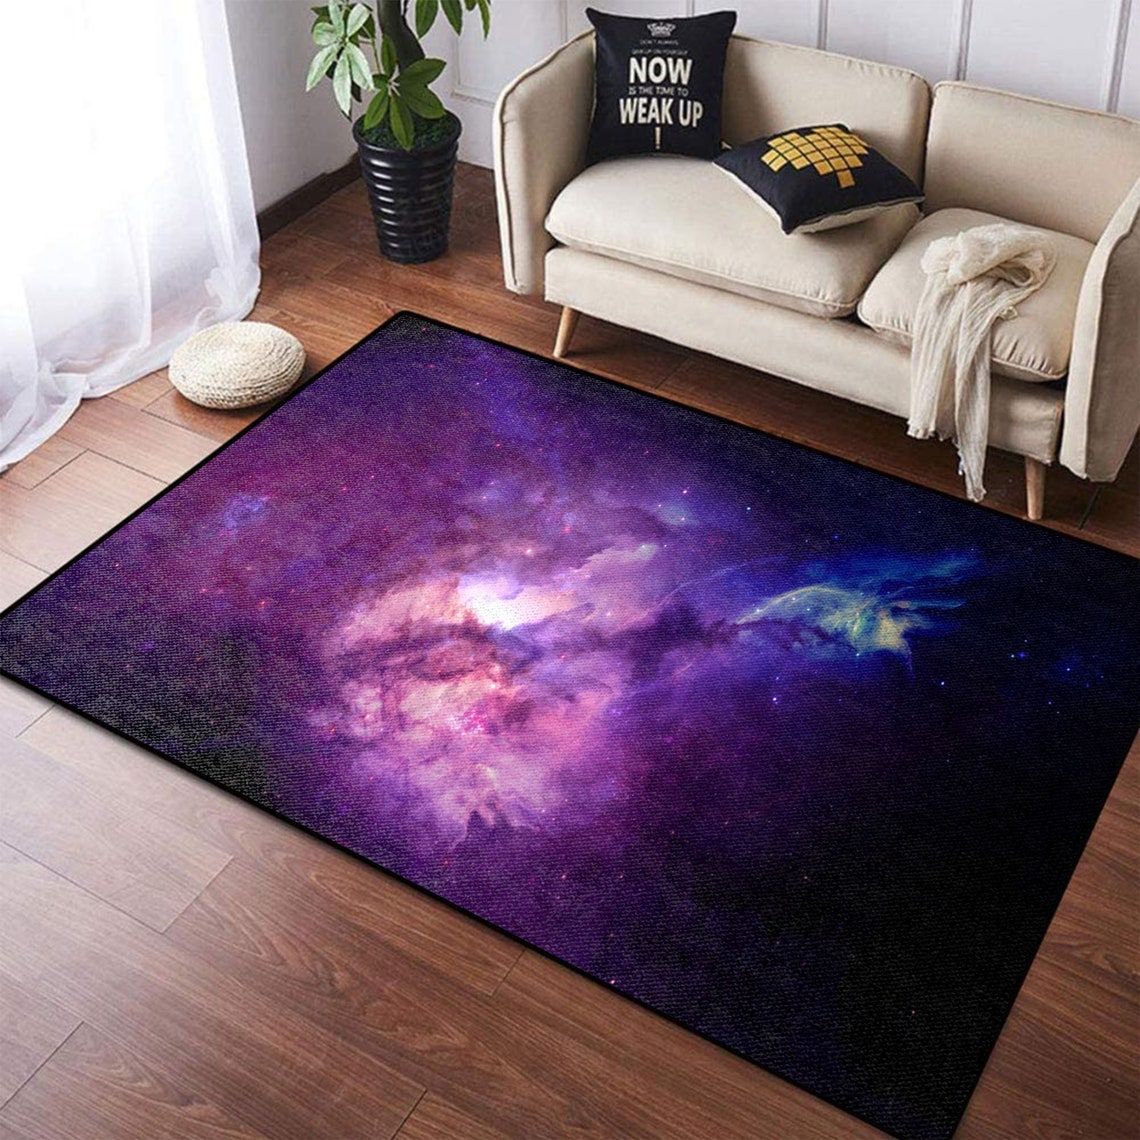 Milky Way Area Rug Colorful Space Galaxy Carpet Beautiful | Etsy